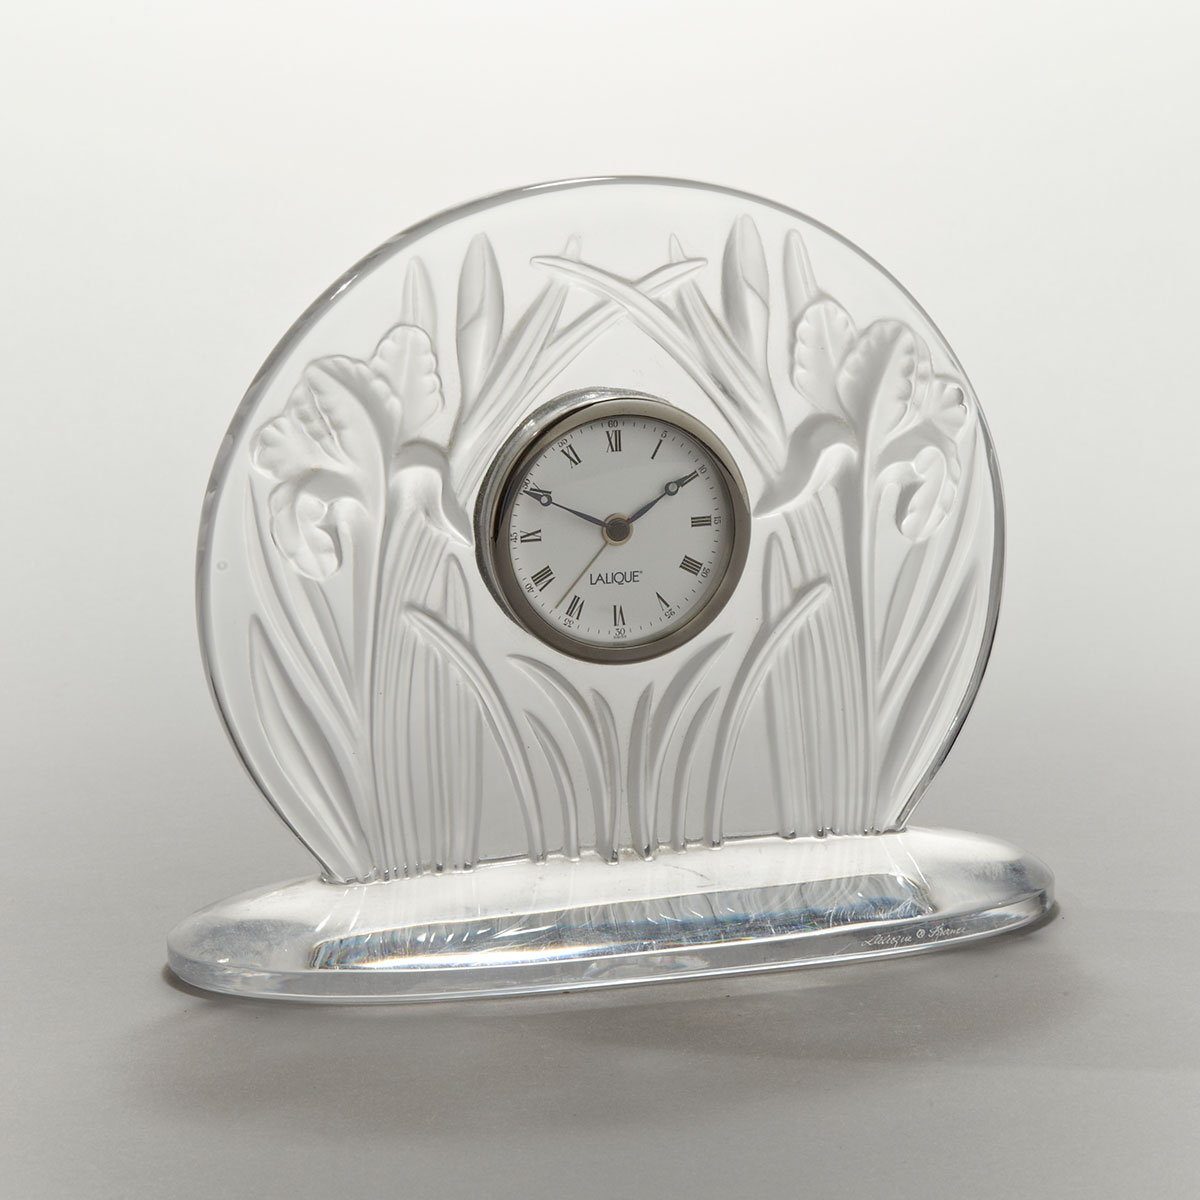 ‘Iris’, Lalique Moulded and Partly Frosted Glass Clock, Marie-Claude Lalique, dated 1988